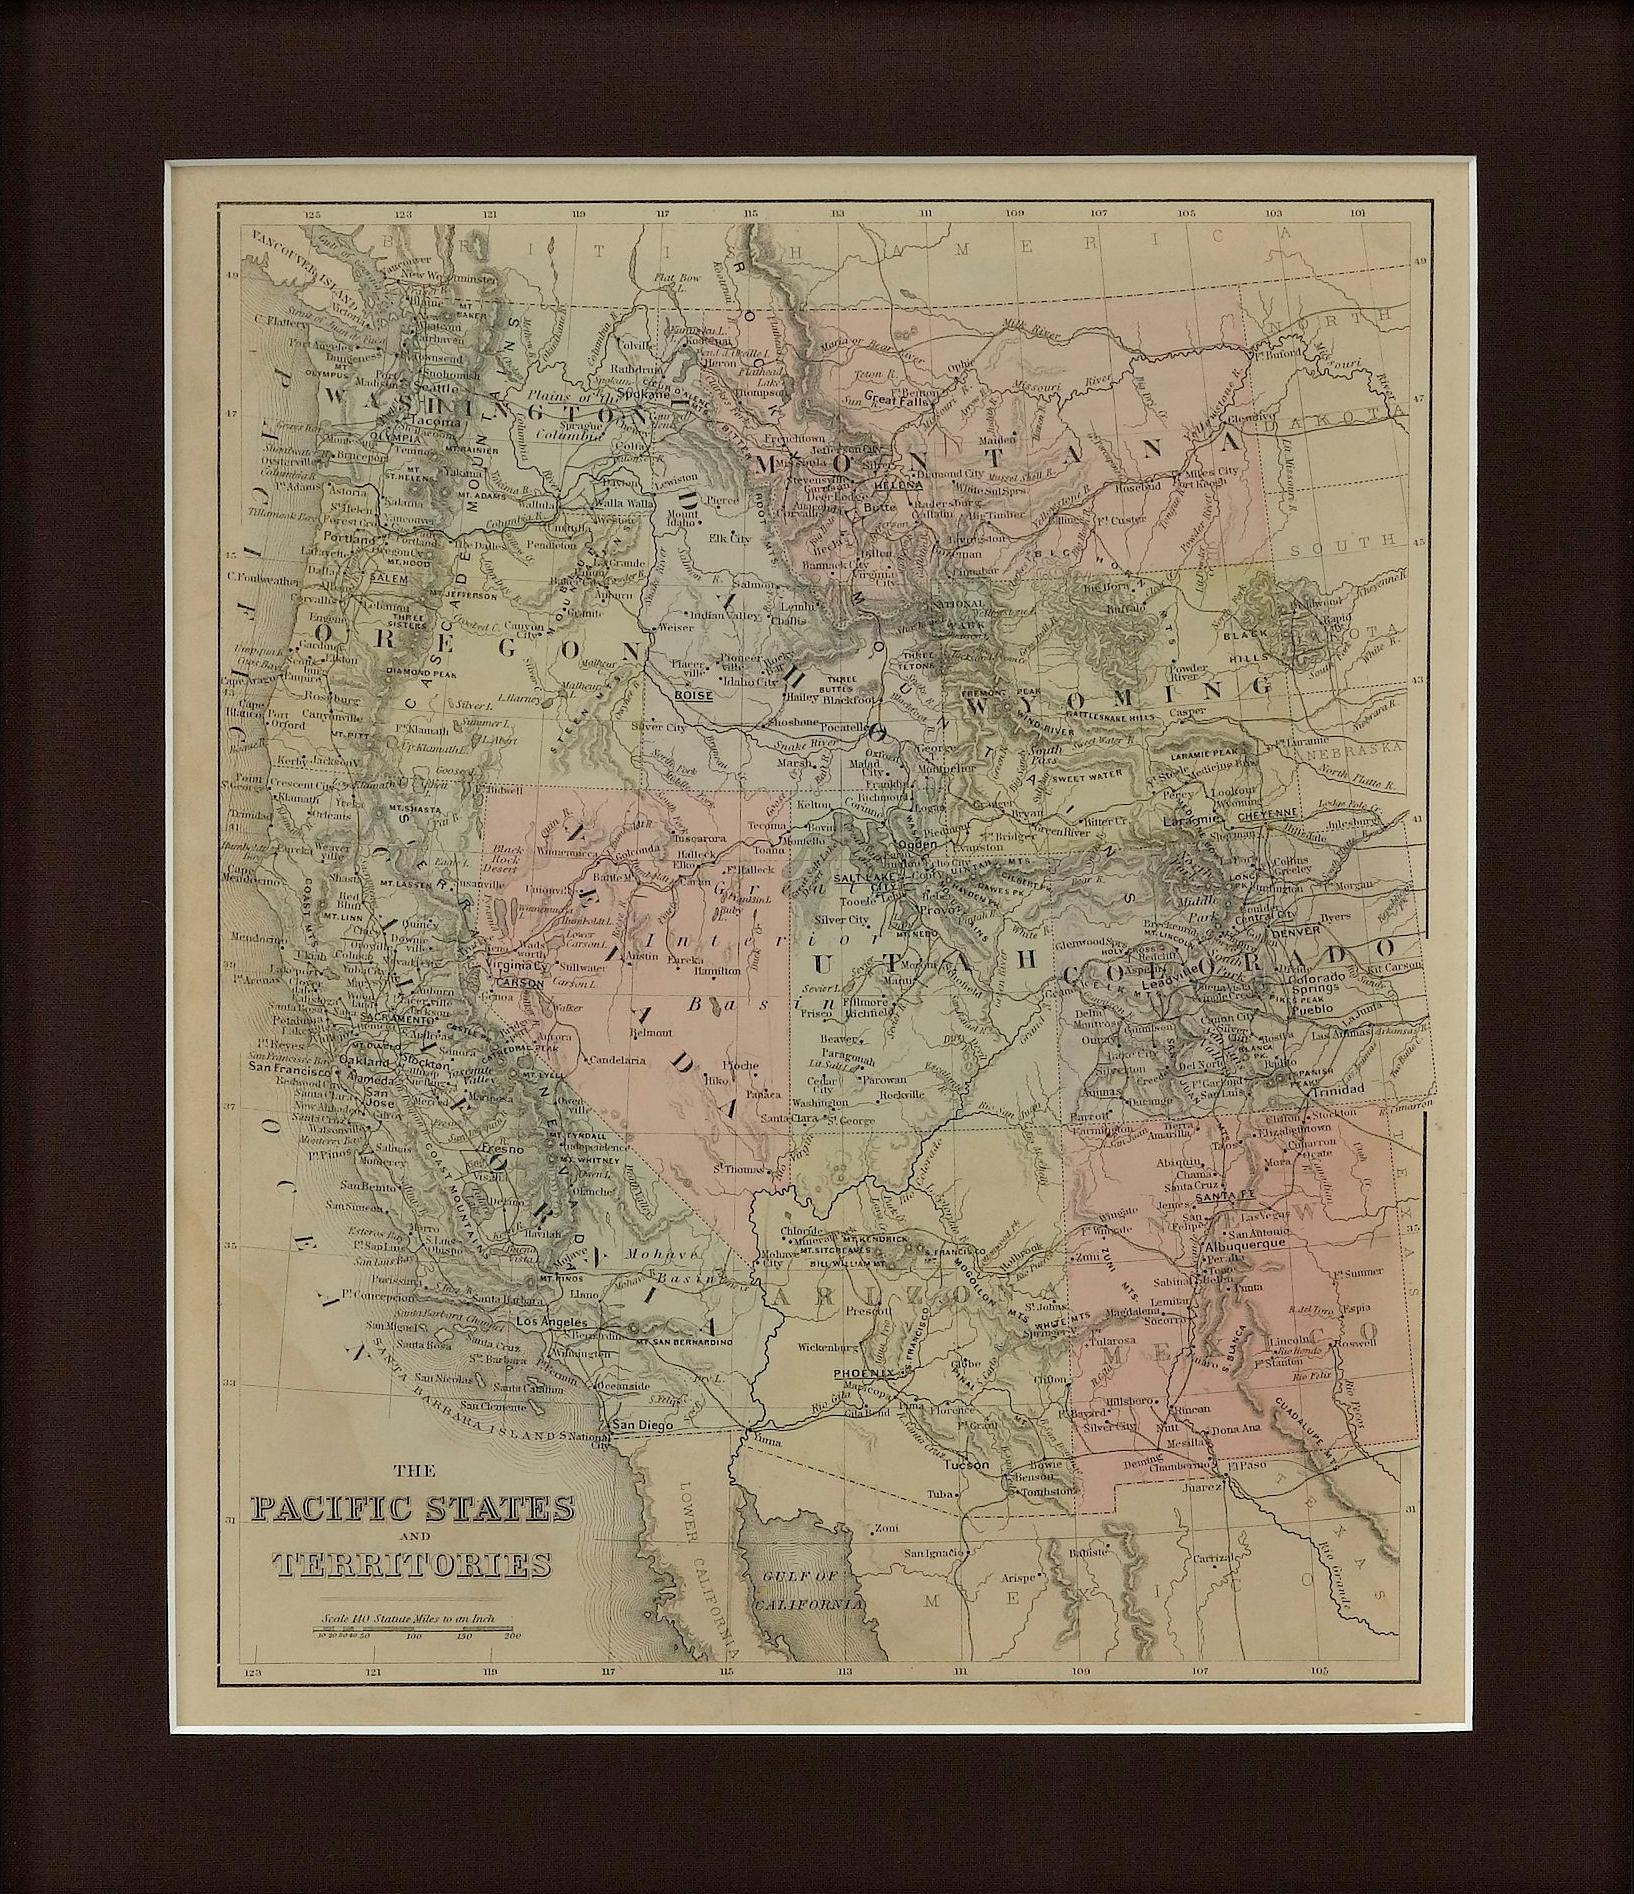 Presented is an uncommon 1889 map of the western United States, titled “The Pacific States and Territories.” The vertical map depicts the Western states at the time: Washington, Oregon, California, Montana, Idaho, Wyoming, Utah, Colorado, Arizona,